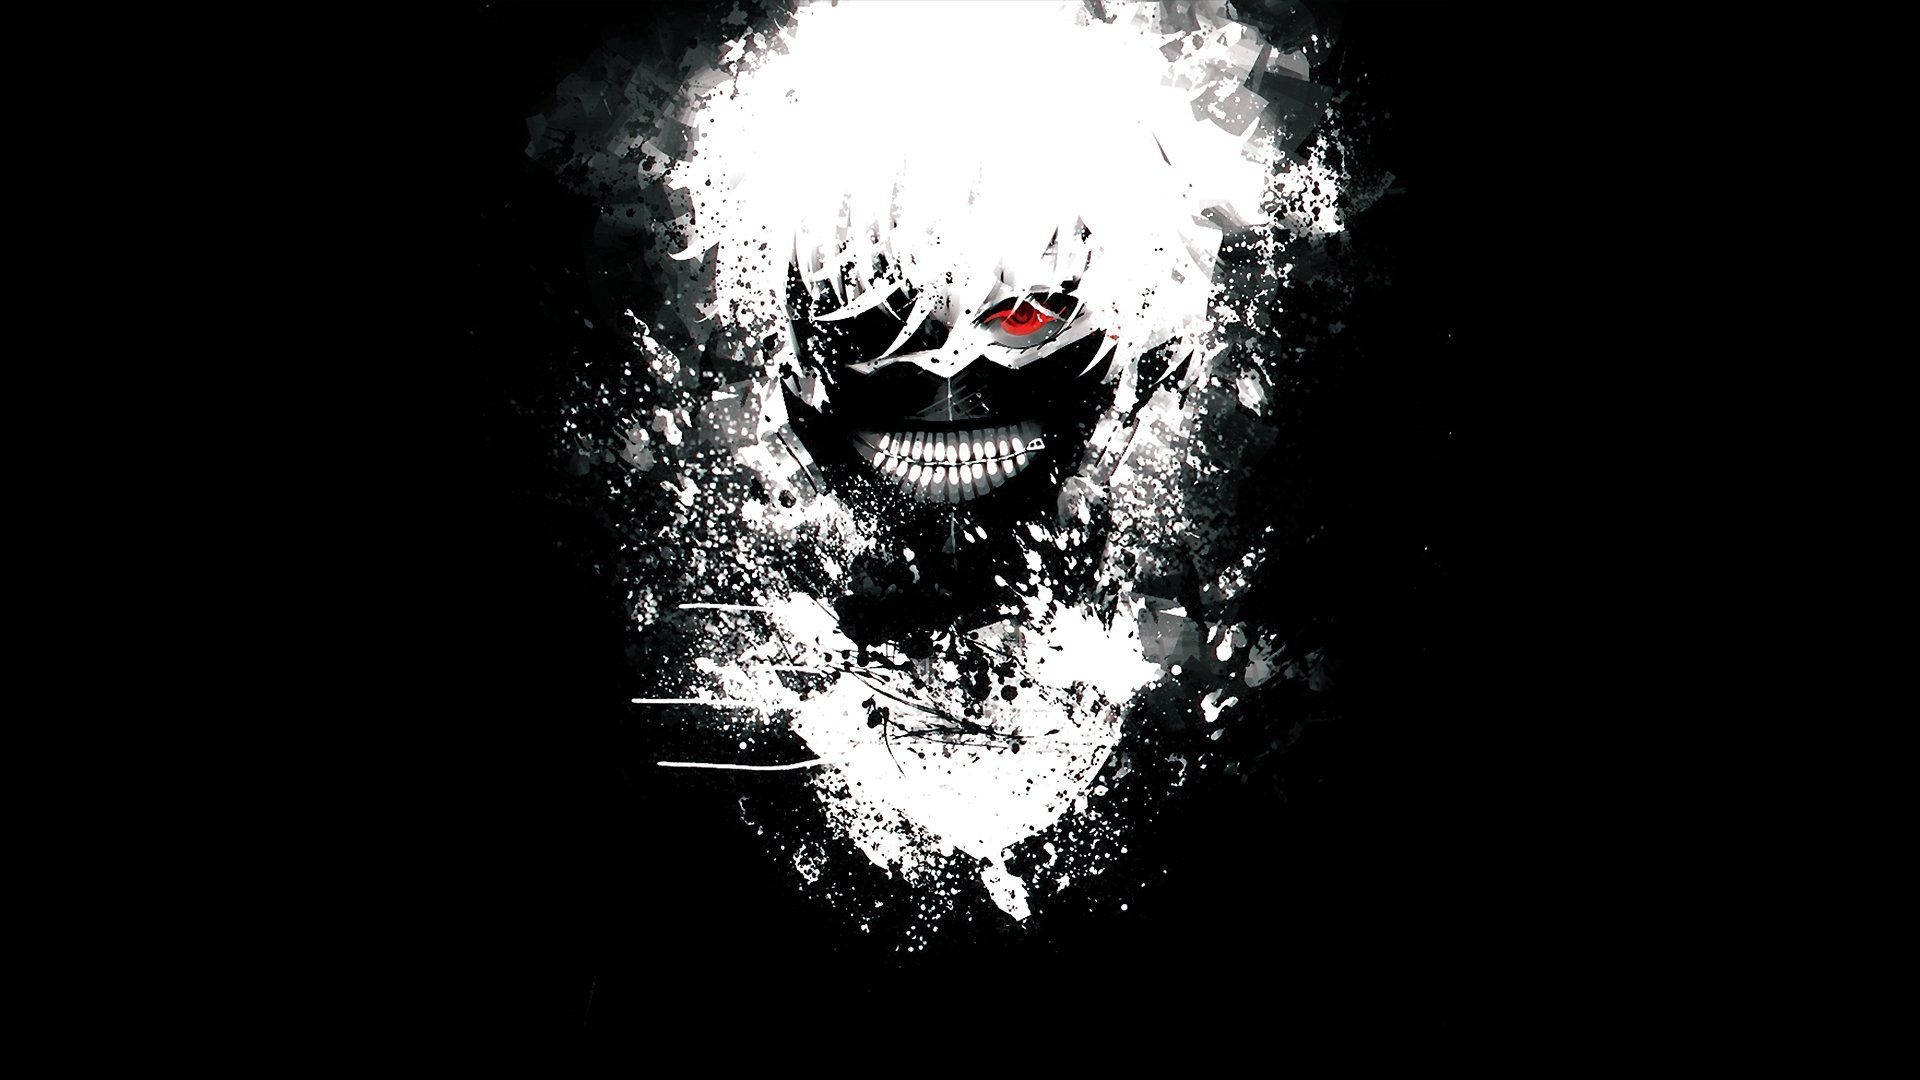 Kaneki Ken stands powerful, with eyepatch and mask. Wallpaper